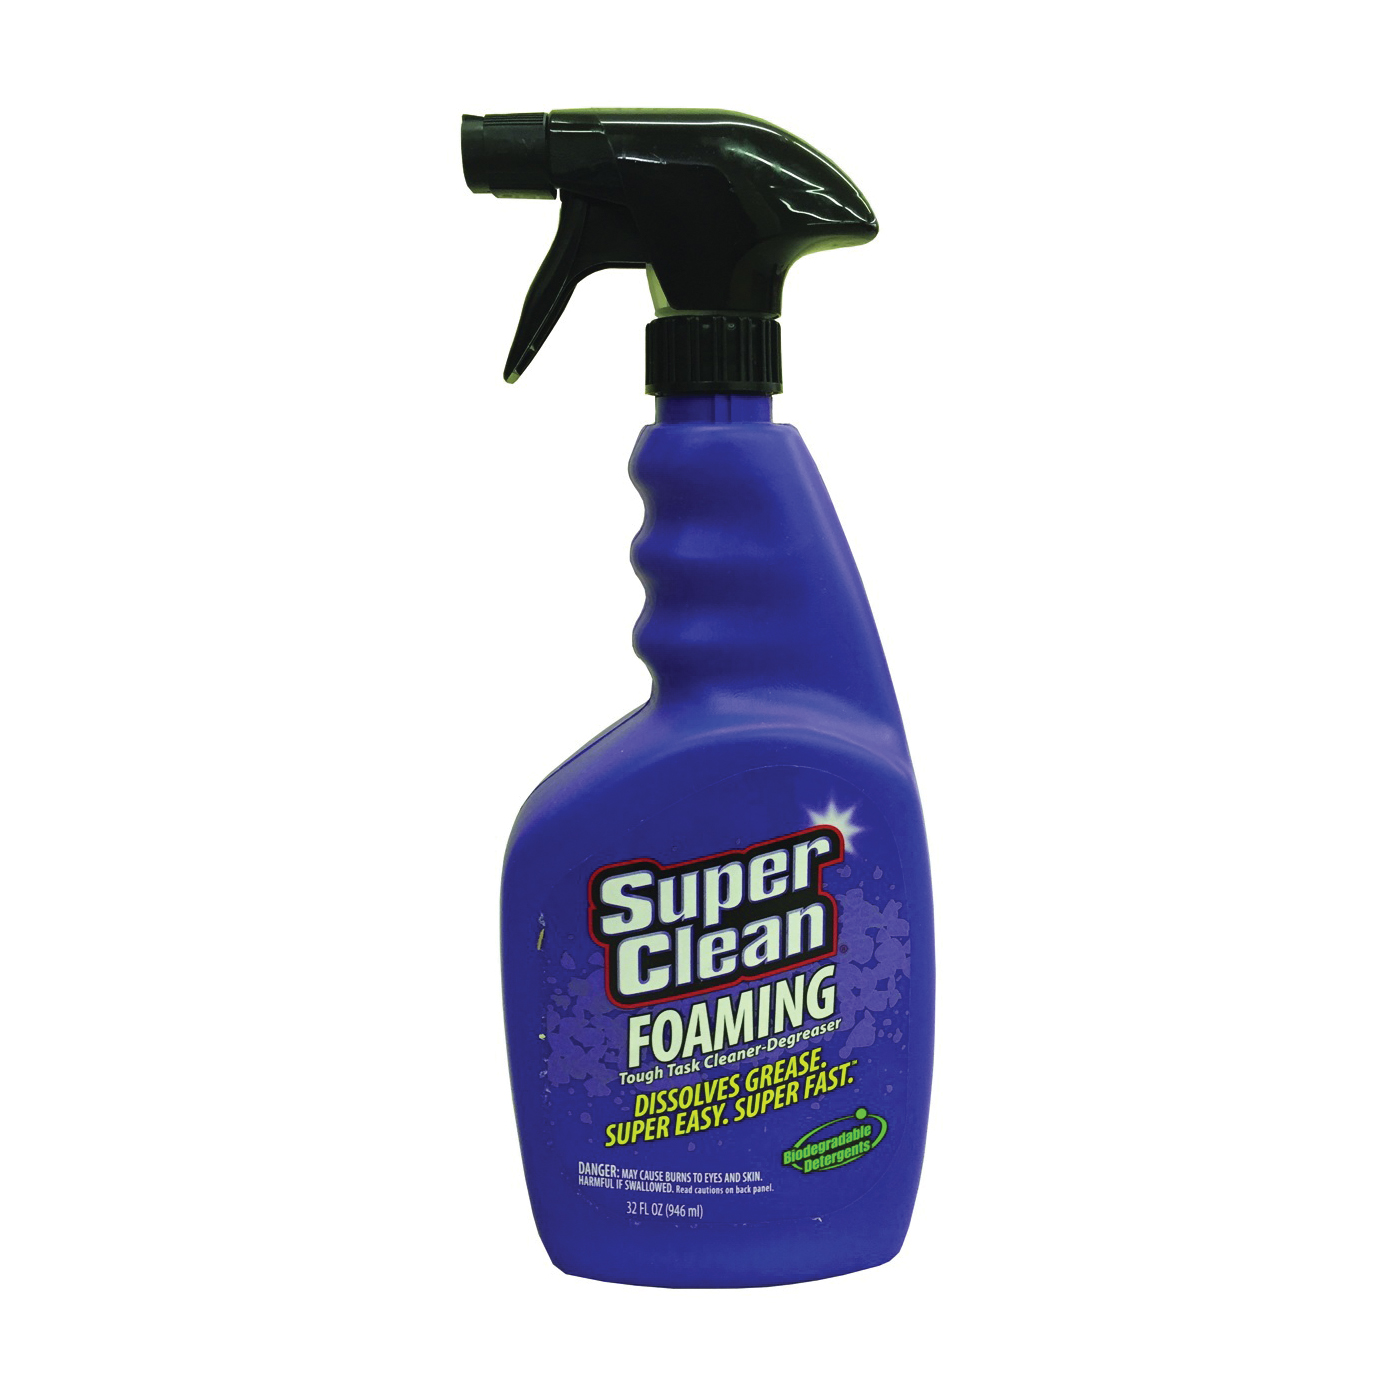 Superclean 301032 Cleaner and Degreaser, 32 oz Bottle, Liquid, Citrus - 1